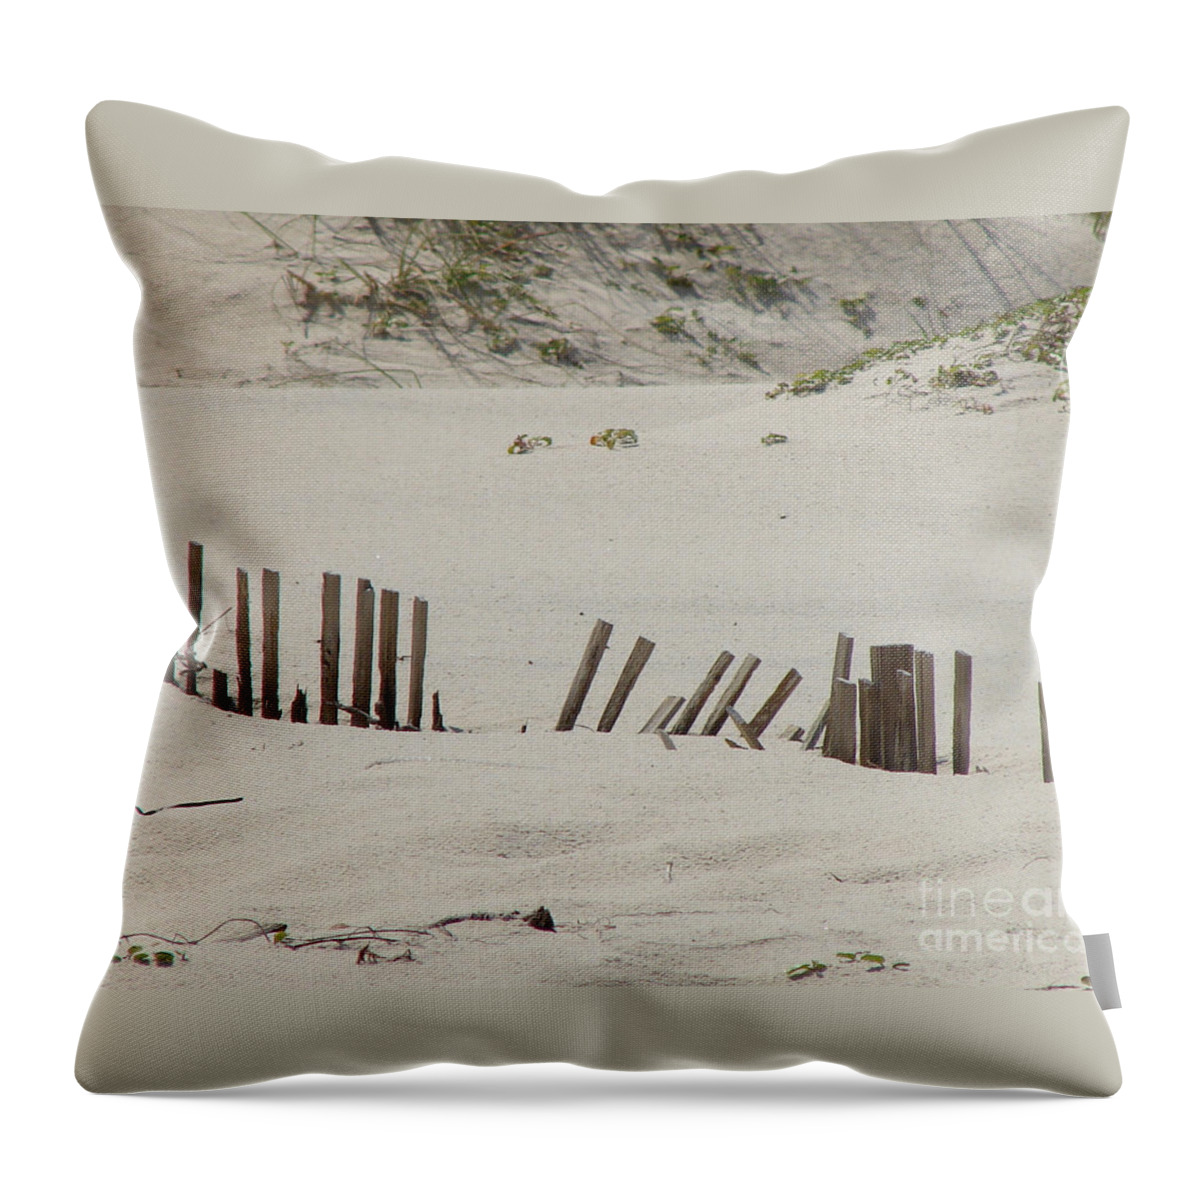 Sand Throw Pillow featuring the photograph Sand Dunes At Gulf Shores by Leara Nicole Morris-Clark